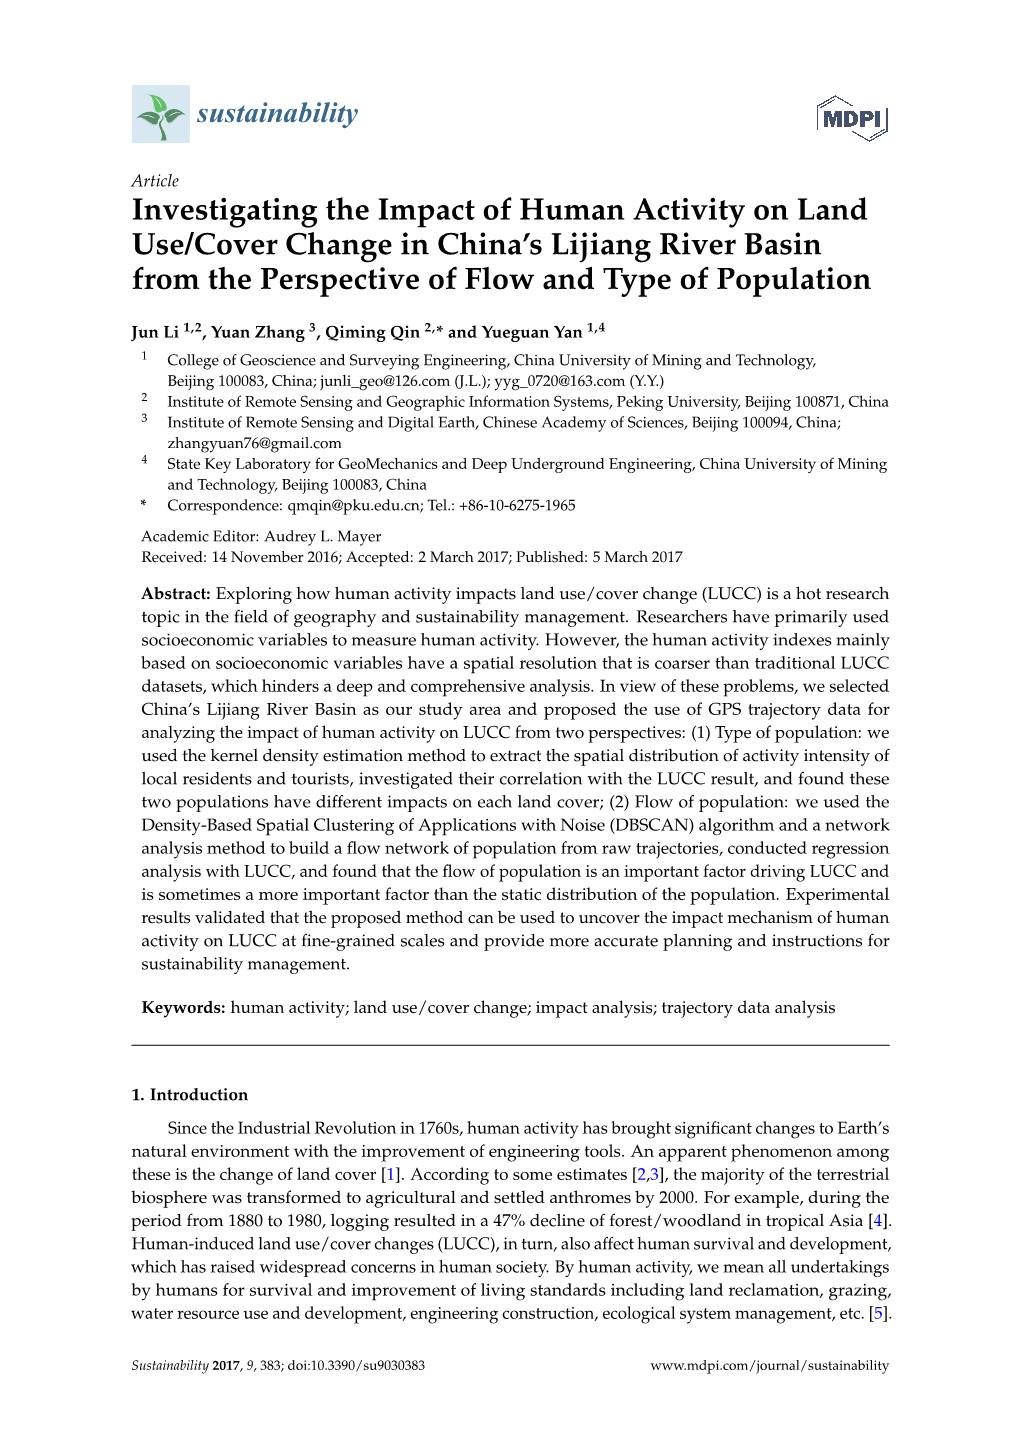 Investigating the Impact of Human Activity on Land Use/Cover Change in China’S Lijiang River Basin from the Perspective of Flow and Type of Population